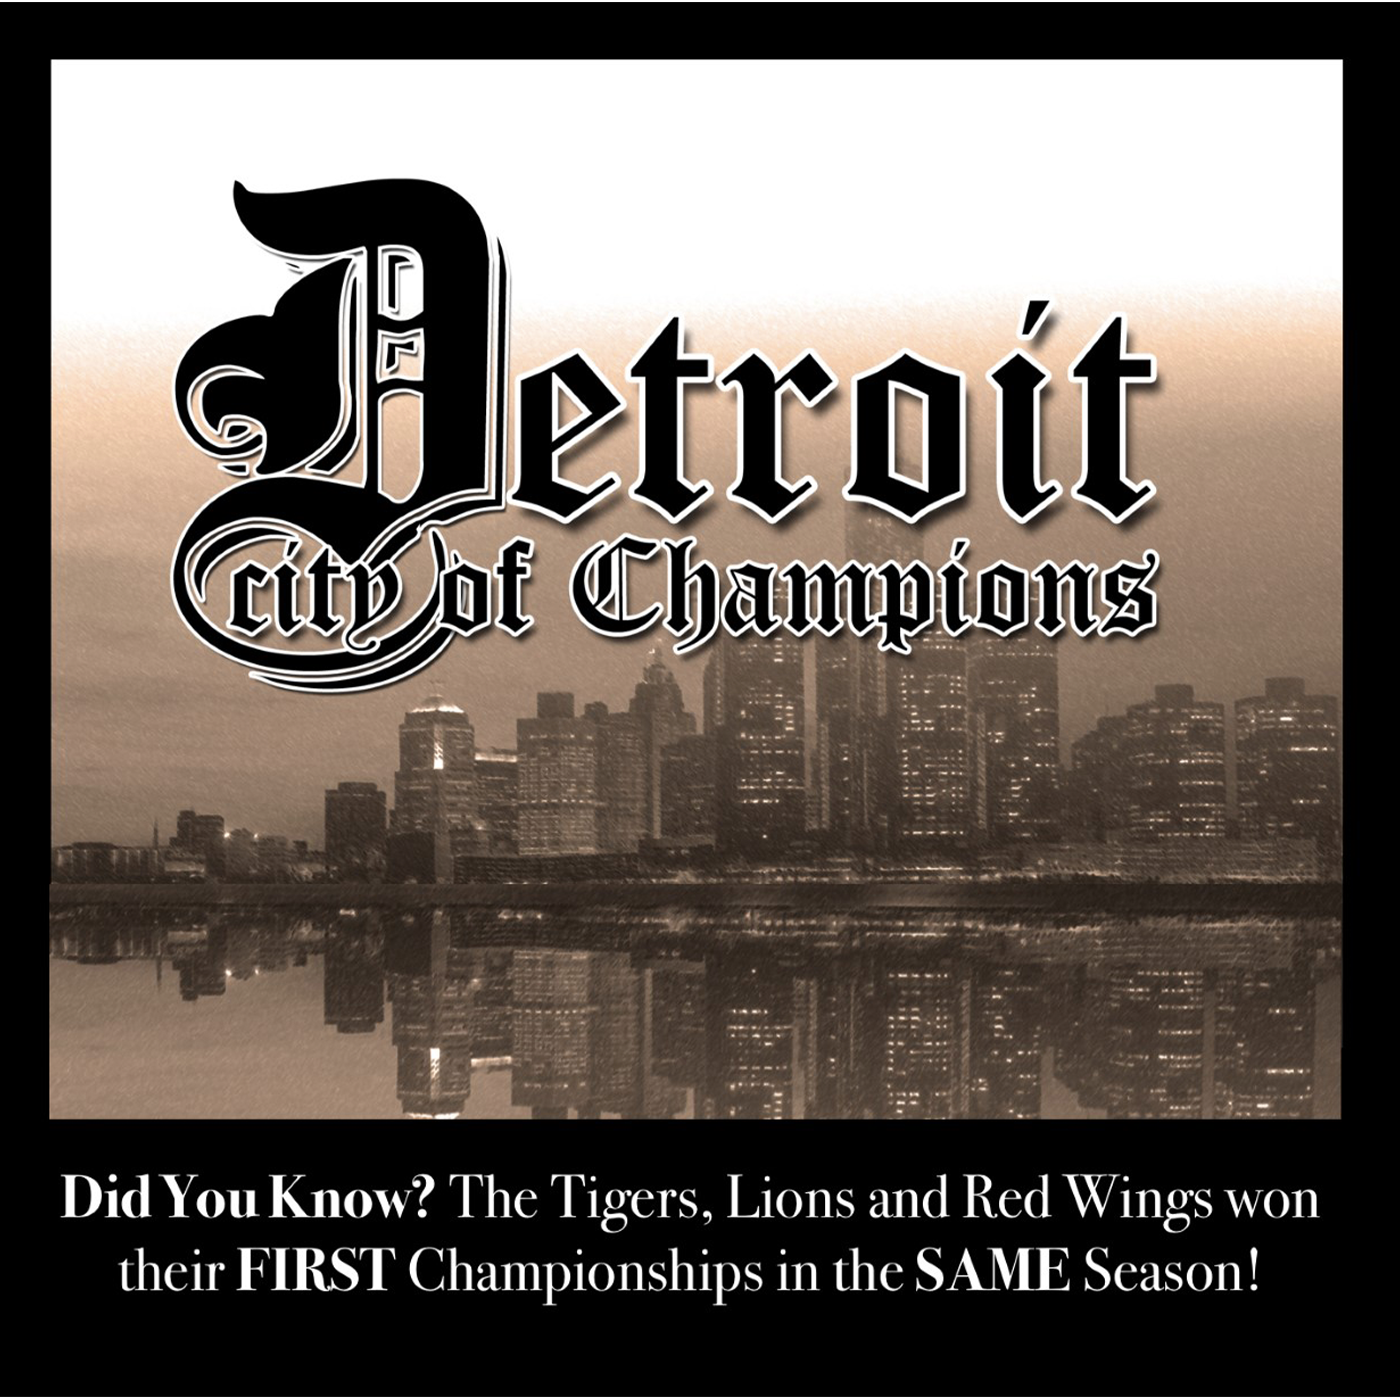 Detroit City of Champions – Episode 18: “The Golden Huddle” – Special Guests Tom Eurich and Will Mault – Part 2